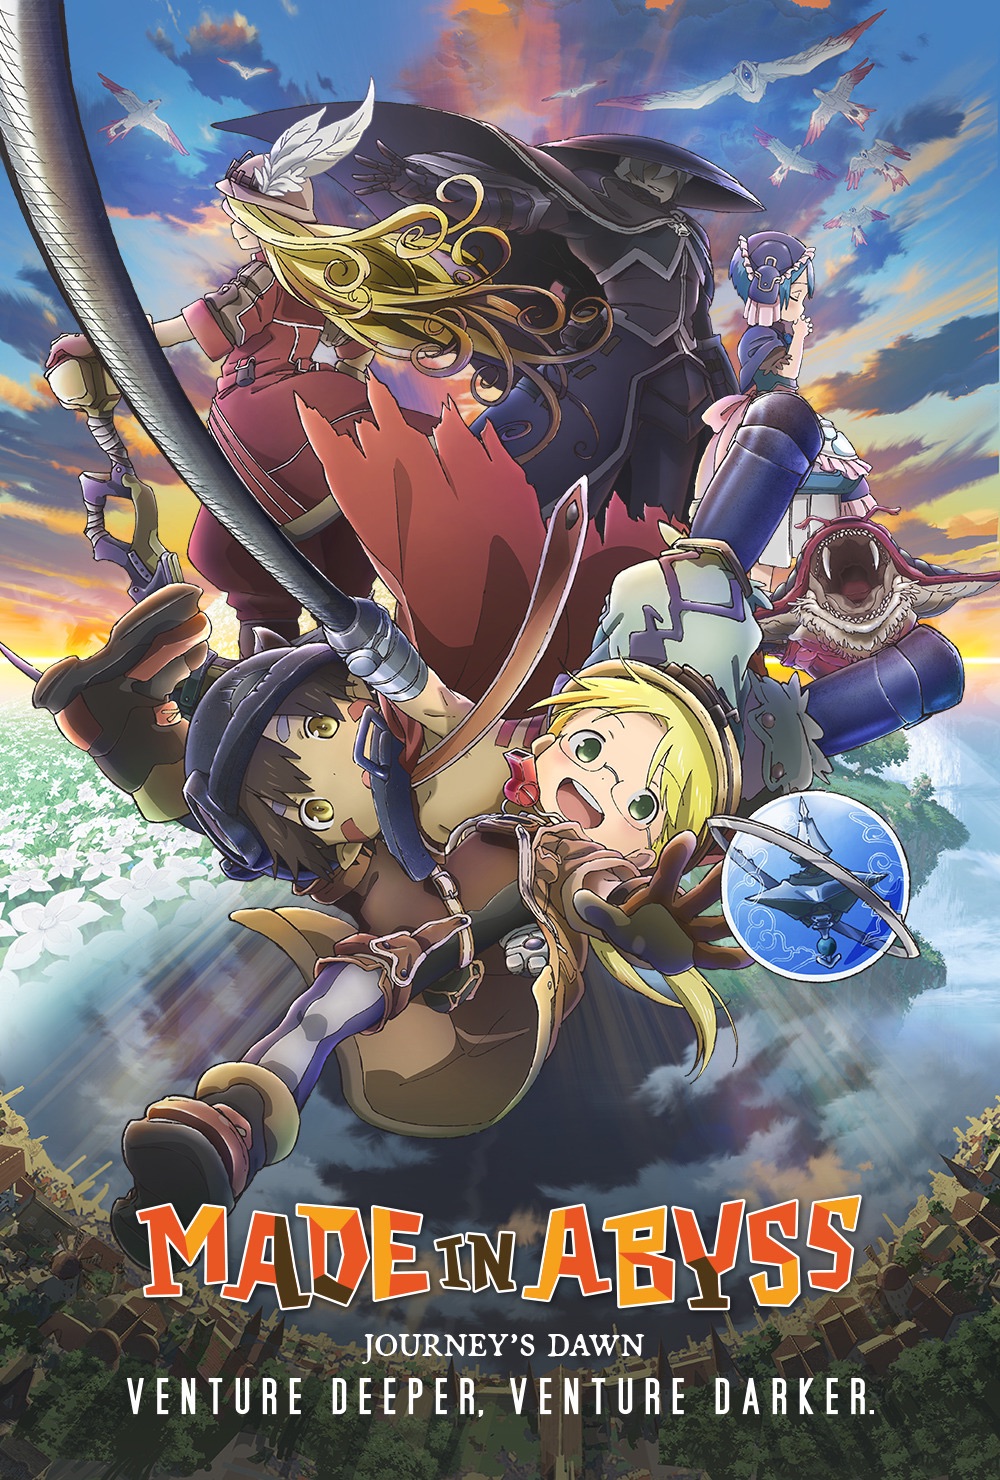 Made in Abyss is Coming Back to Toonami With Season 2